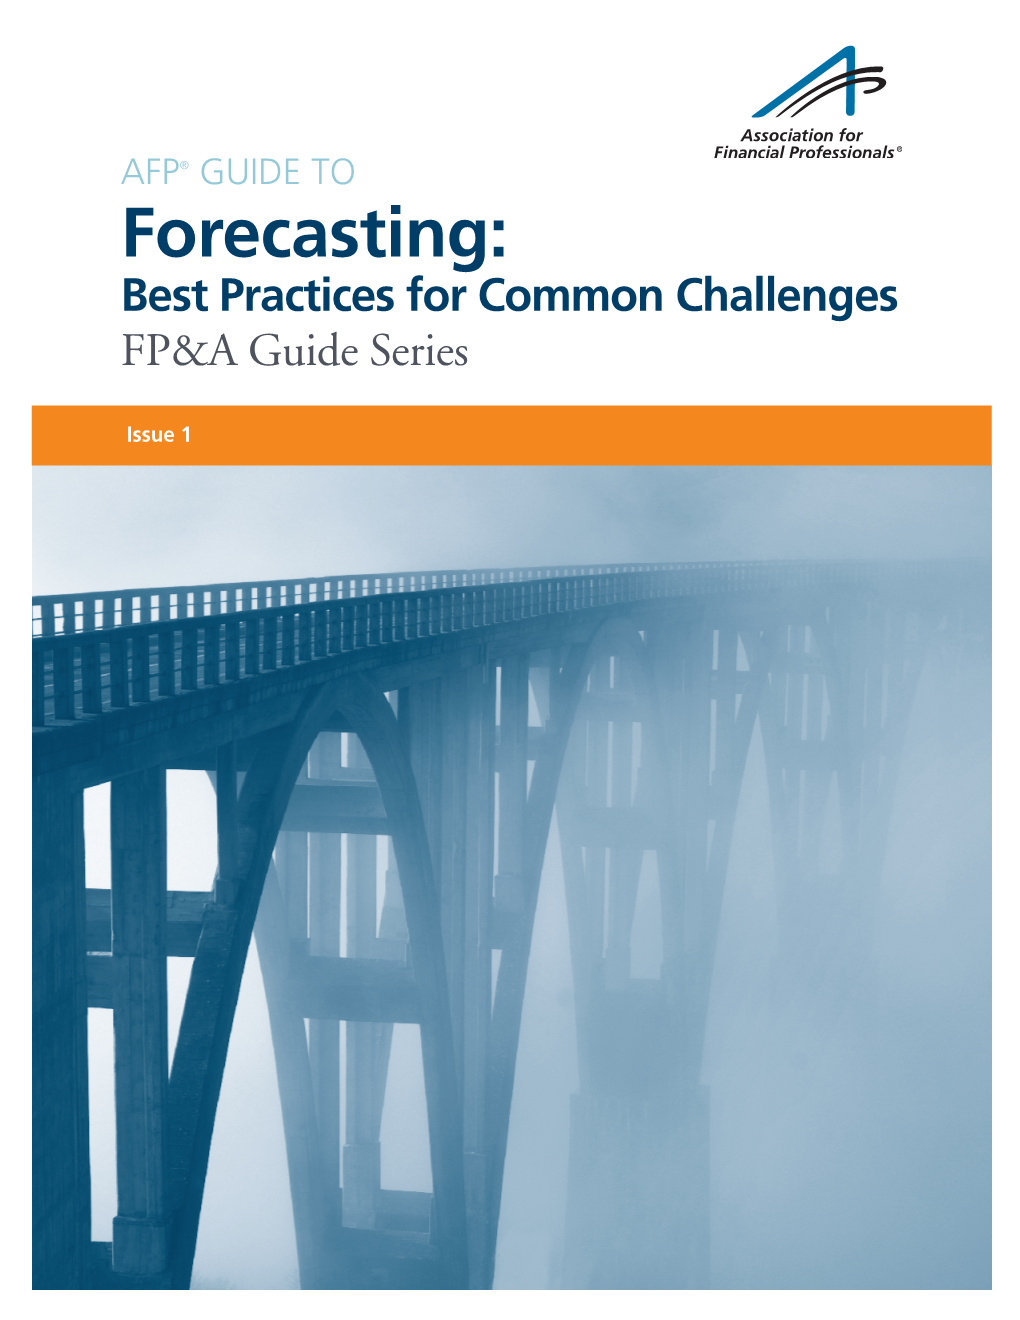 Forecasting: Best Practices for Common Challenges FP&A Guide Series